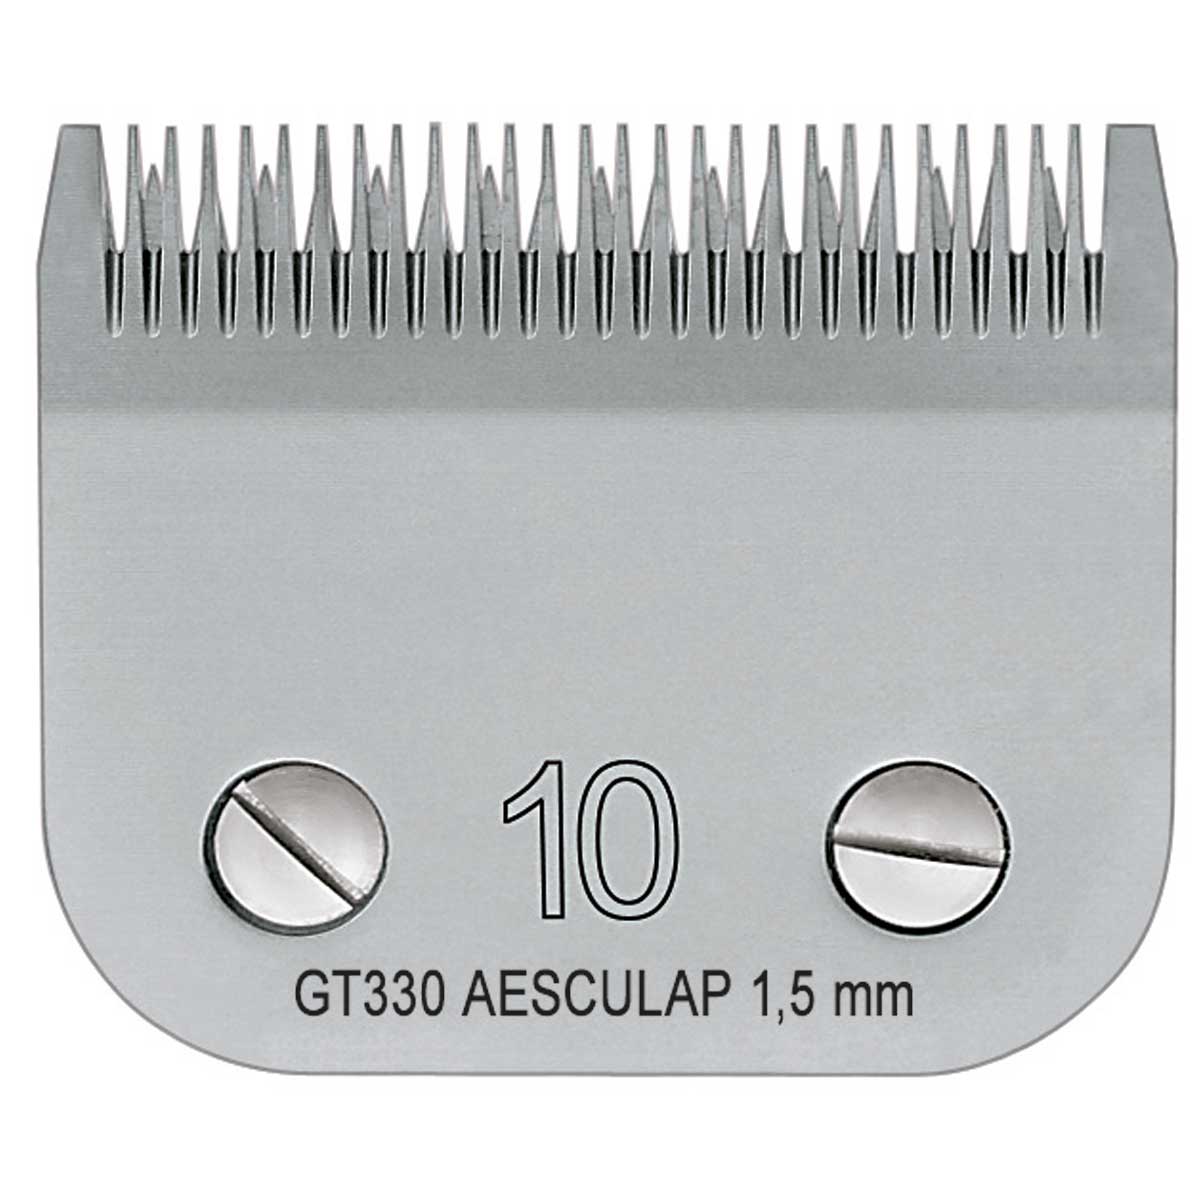 Aesculap Rakhuvud SnapOn 1,5 mm, GT330 #10